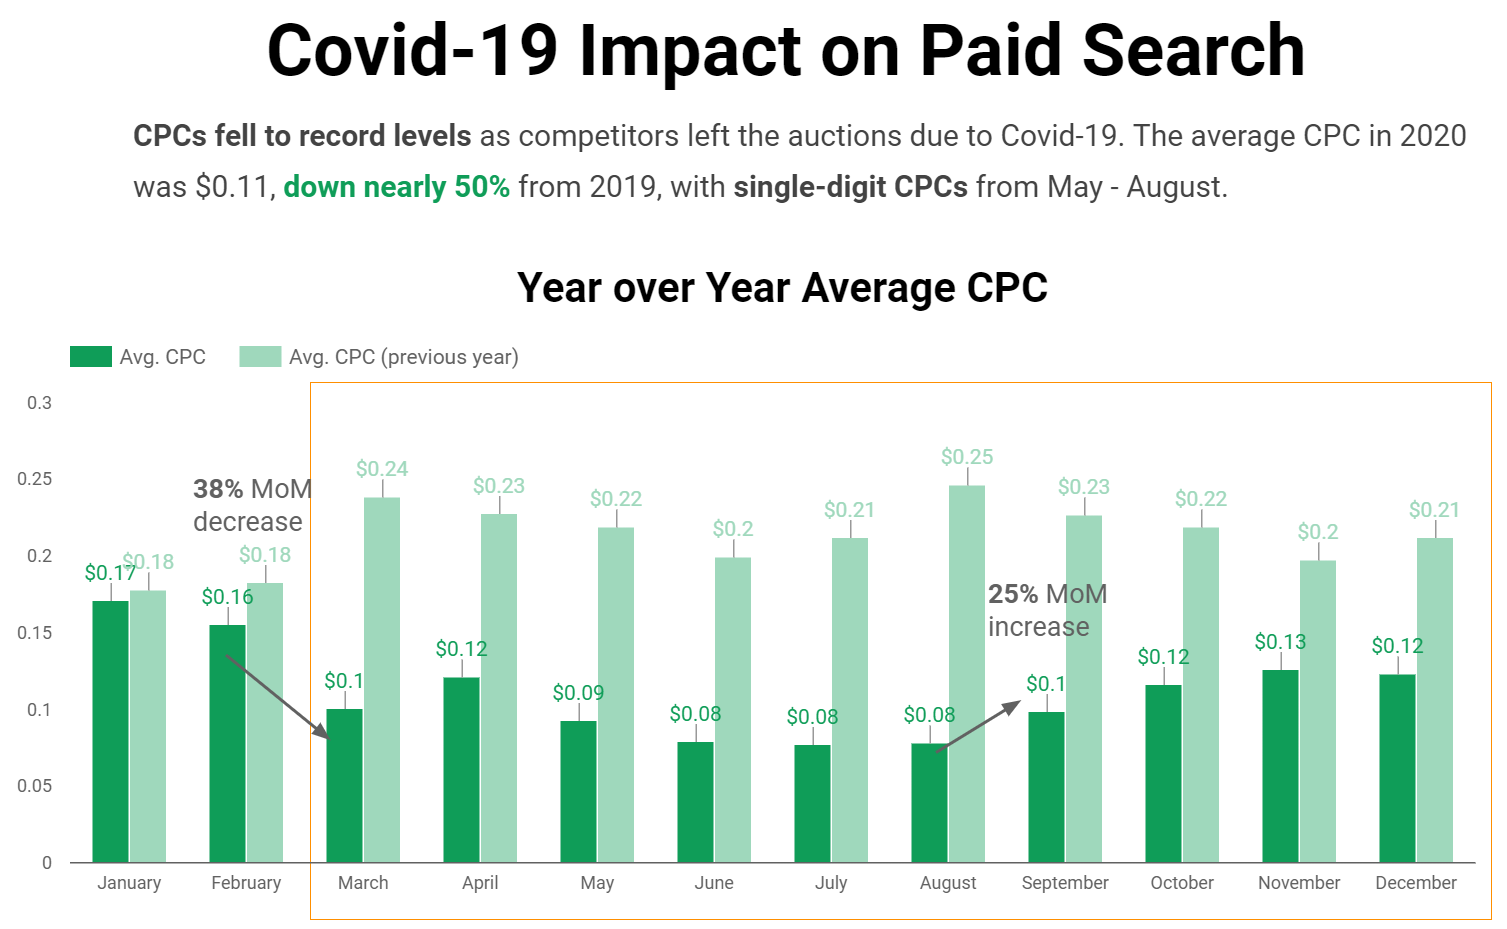 Covid-19 impact on paid search chart